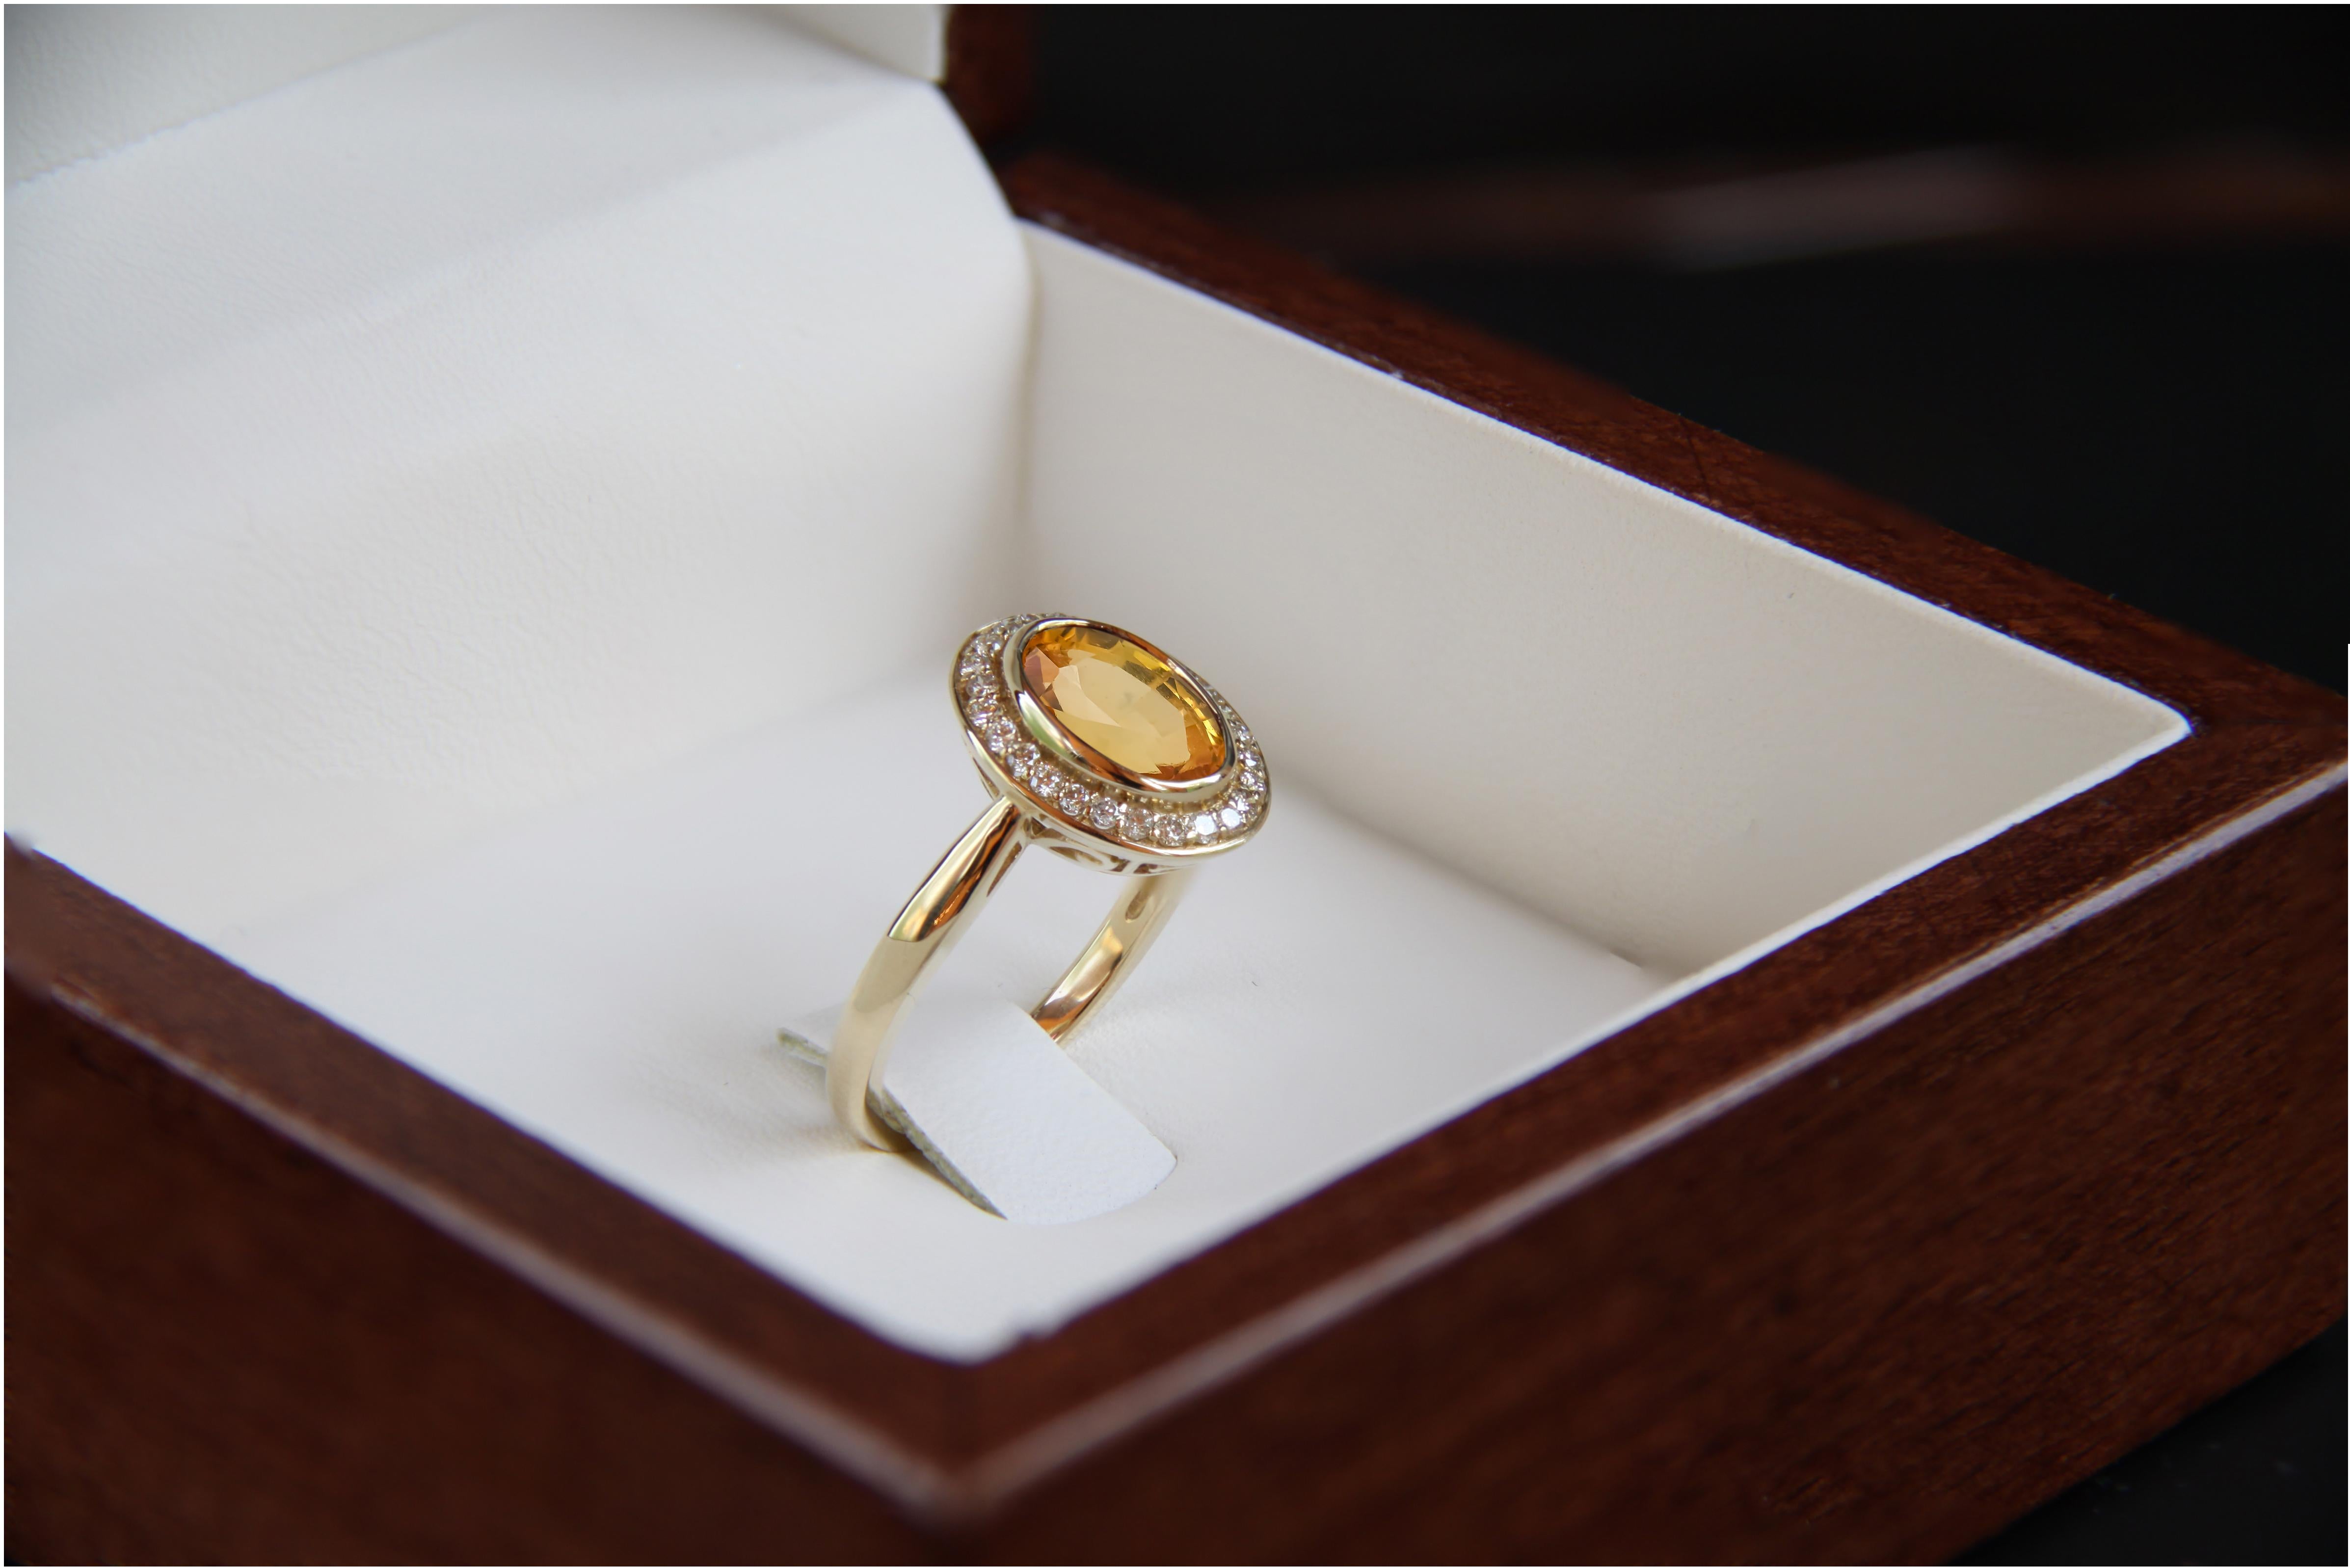 For Sale:  Sapphire and diamonds 14k gold ring. 4